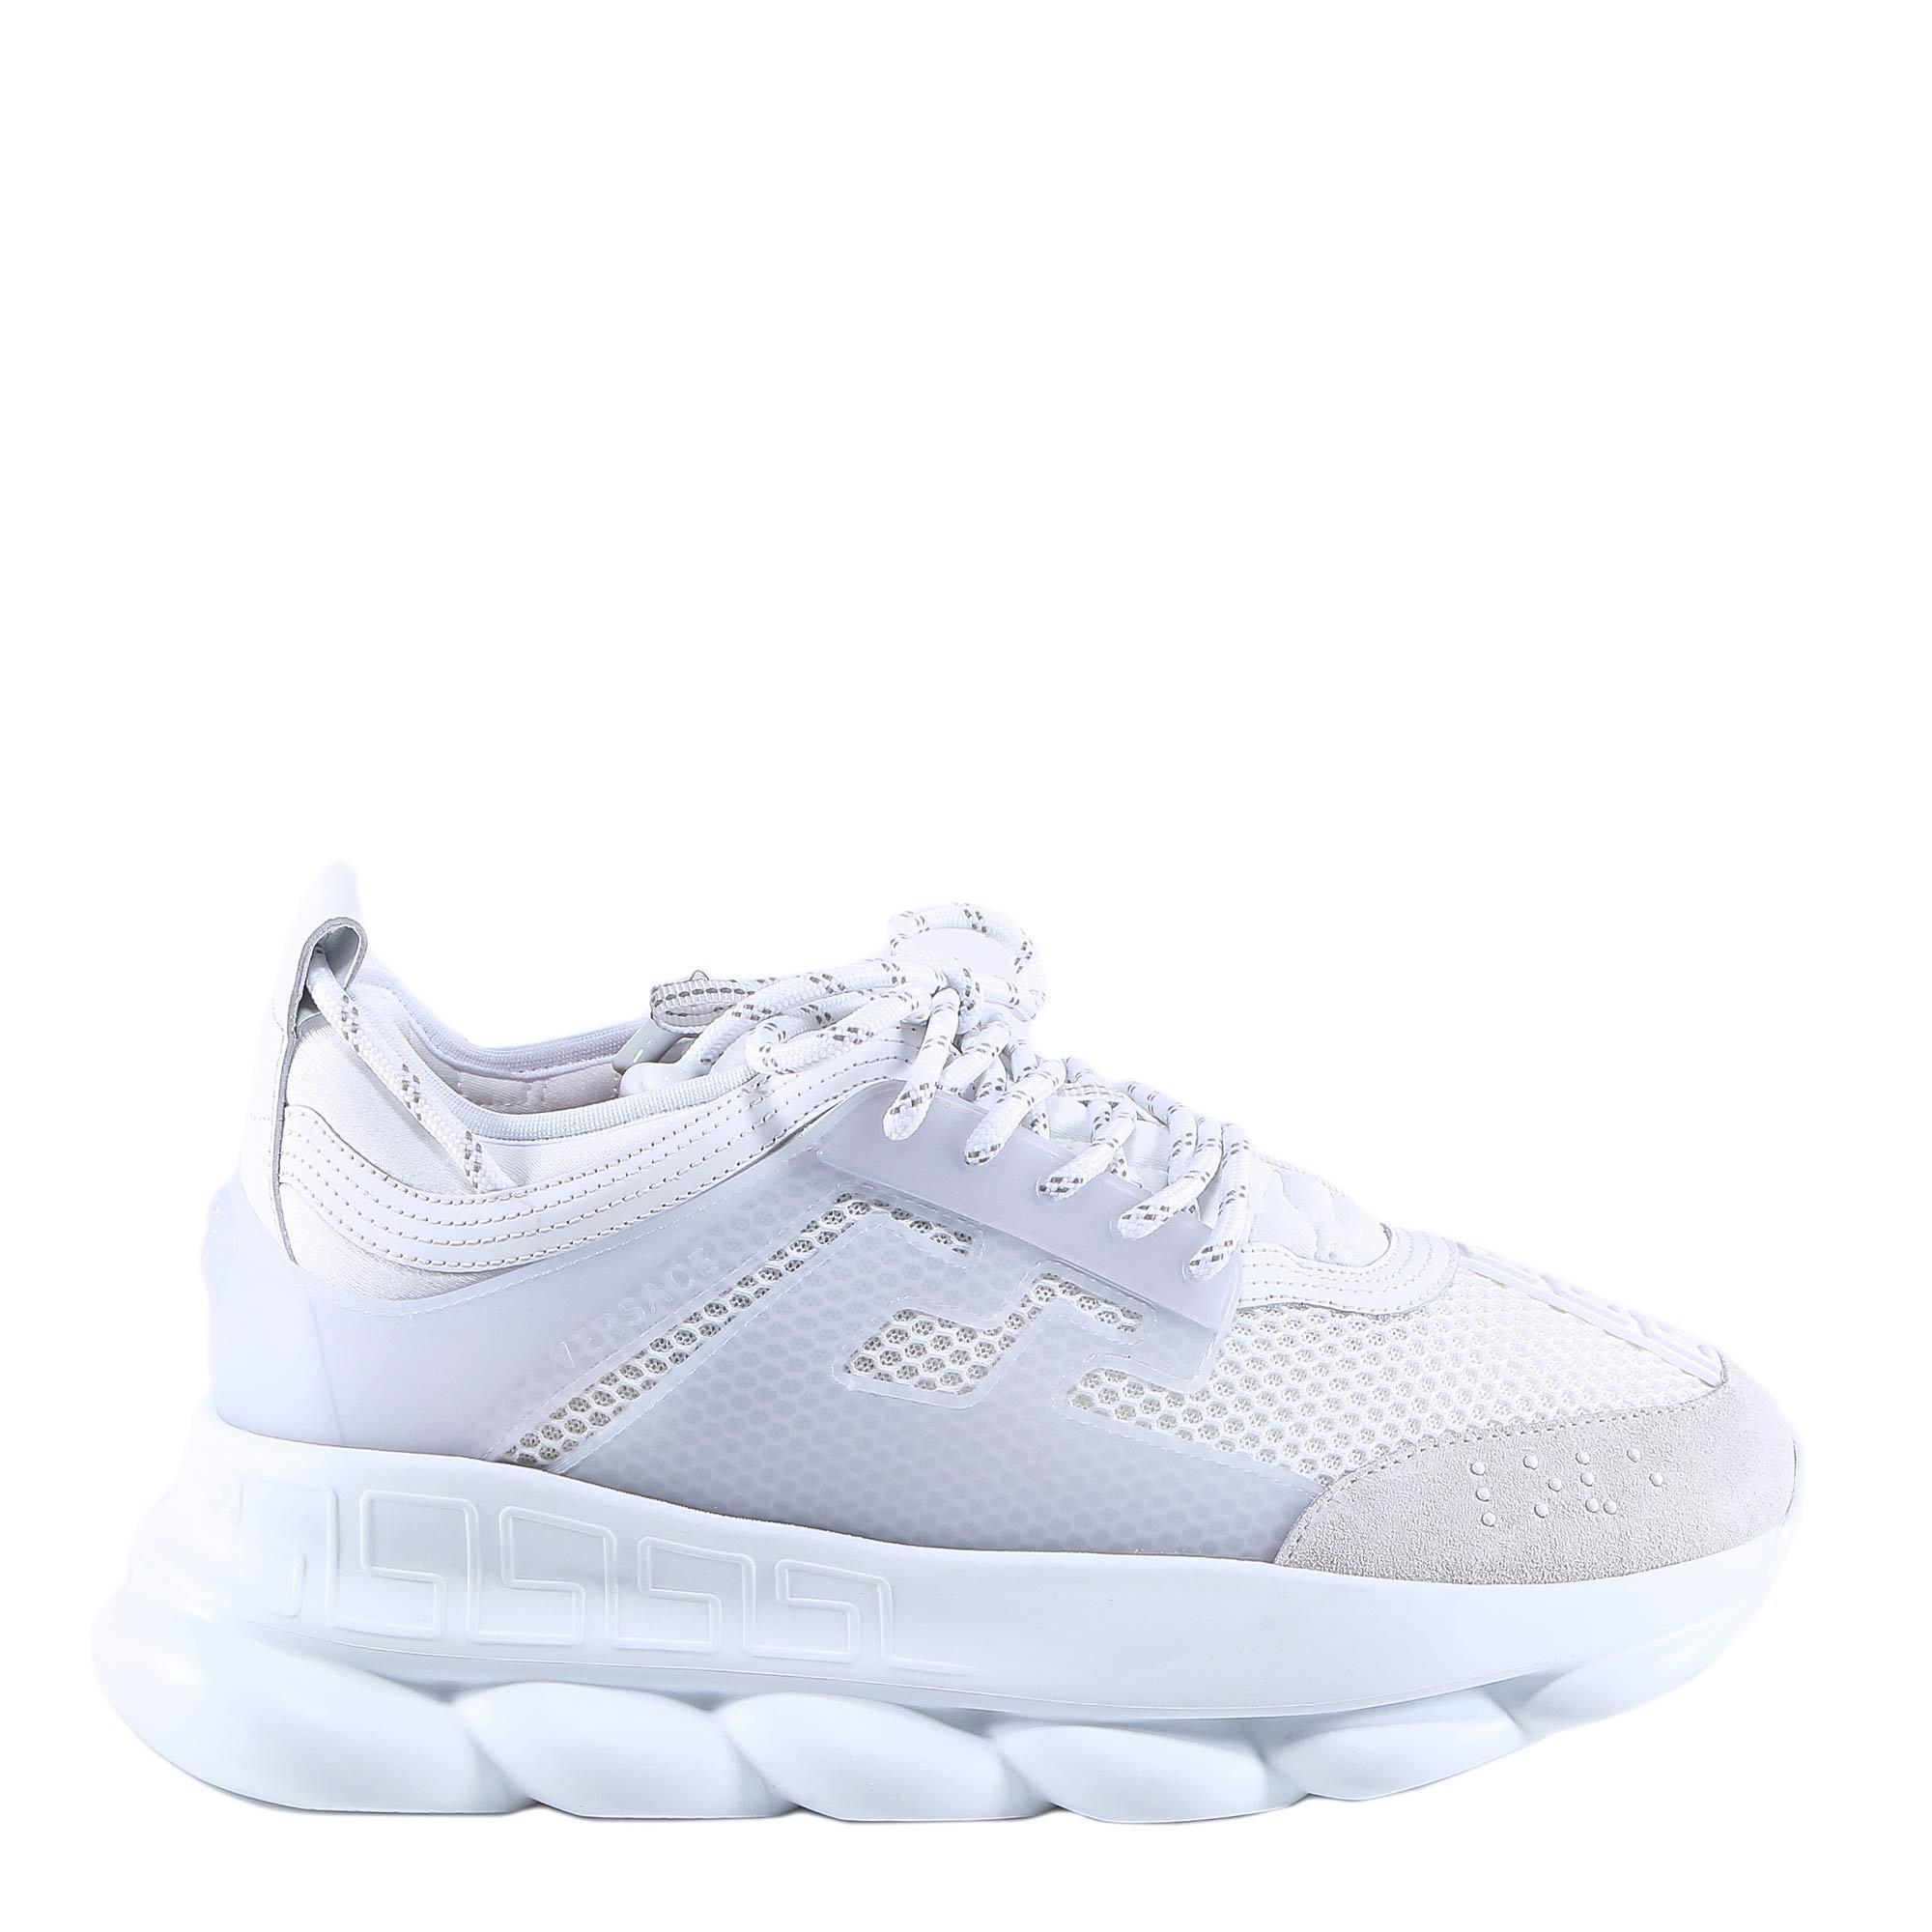 Versace Leather Chain Reaction Chunky Sole Sneakers in White for Men - Lyst